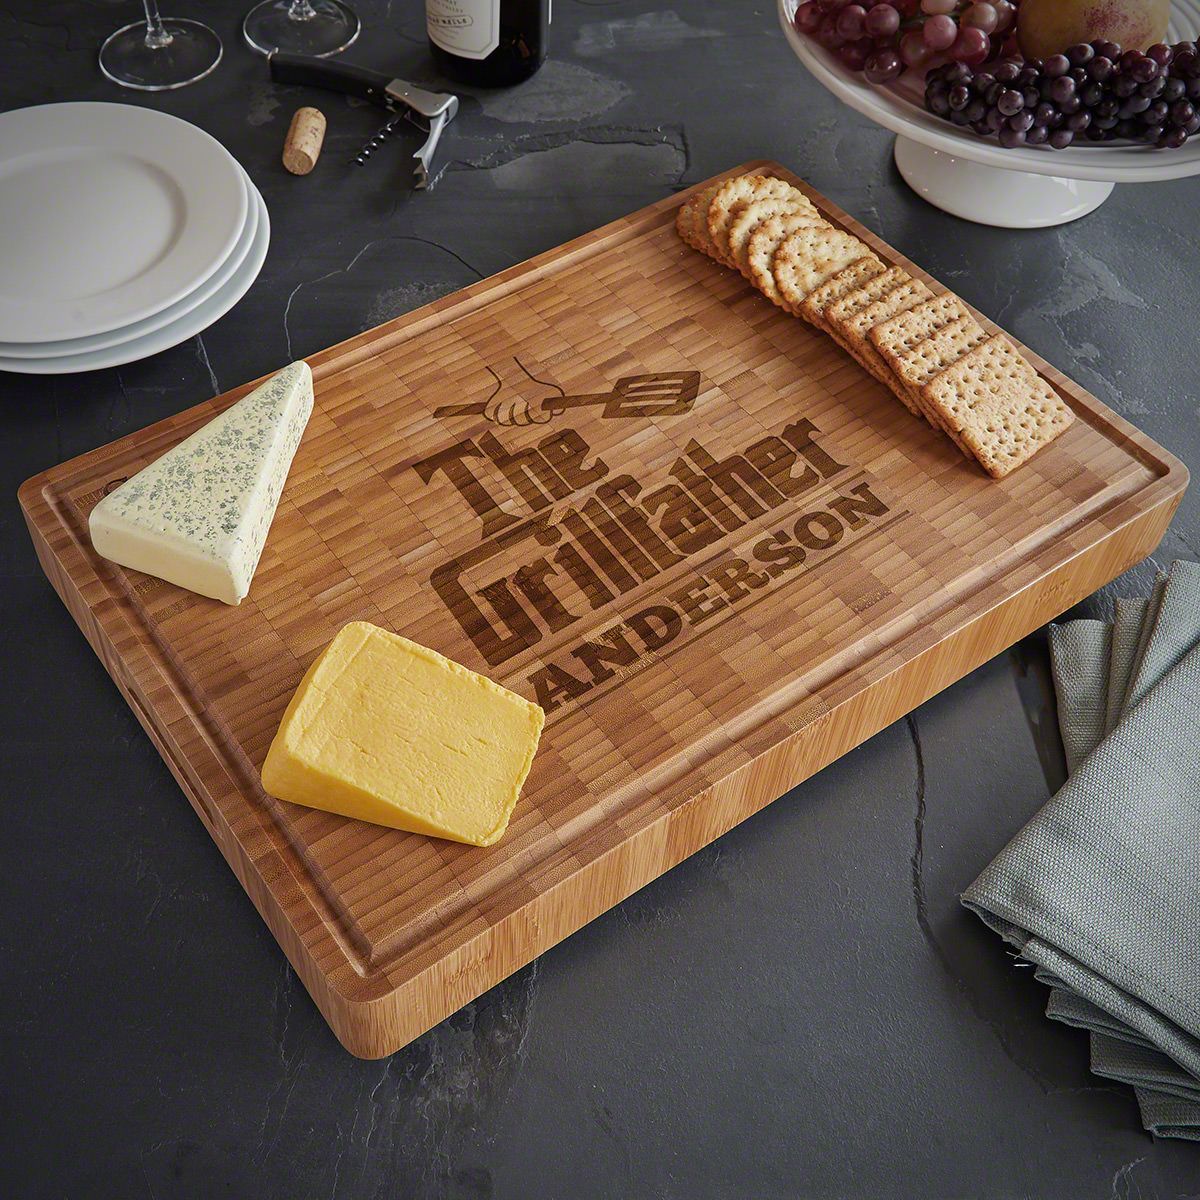 https://images.homewetbar.com/media/catalog/product/8/9/8975-the-grillfather-bamboo-butcher-block-cutting-board-primary.jpg?store=default&image-type=image